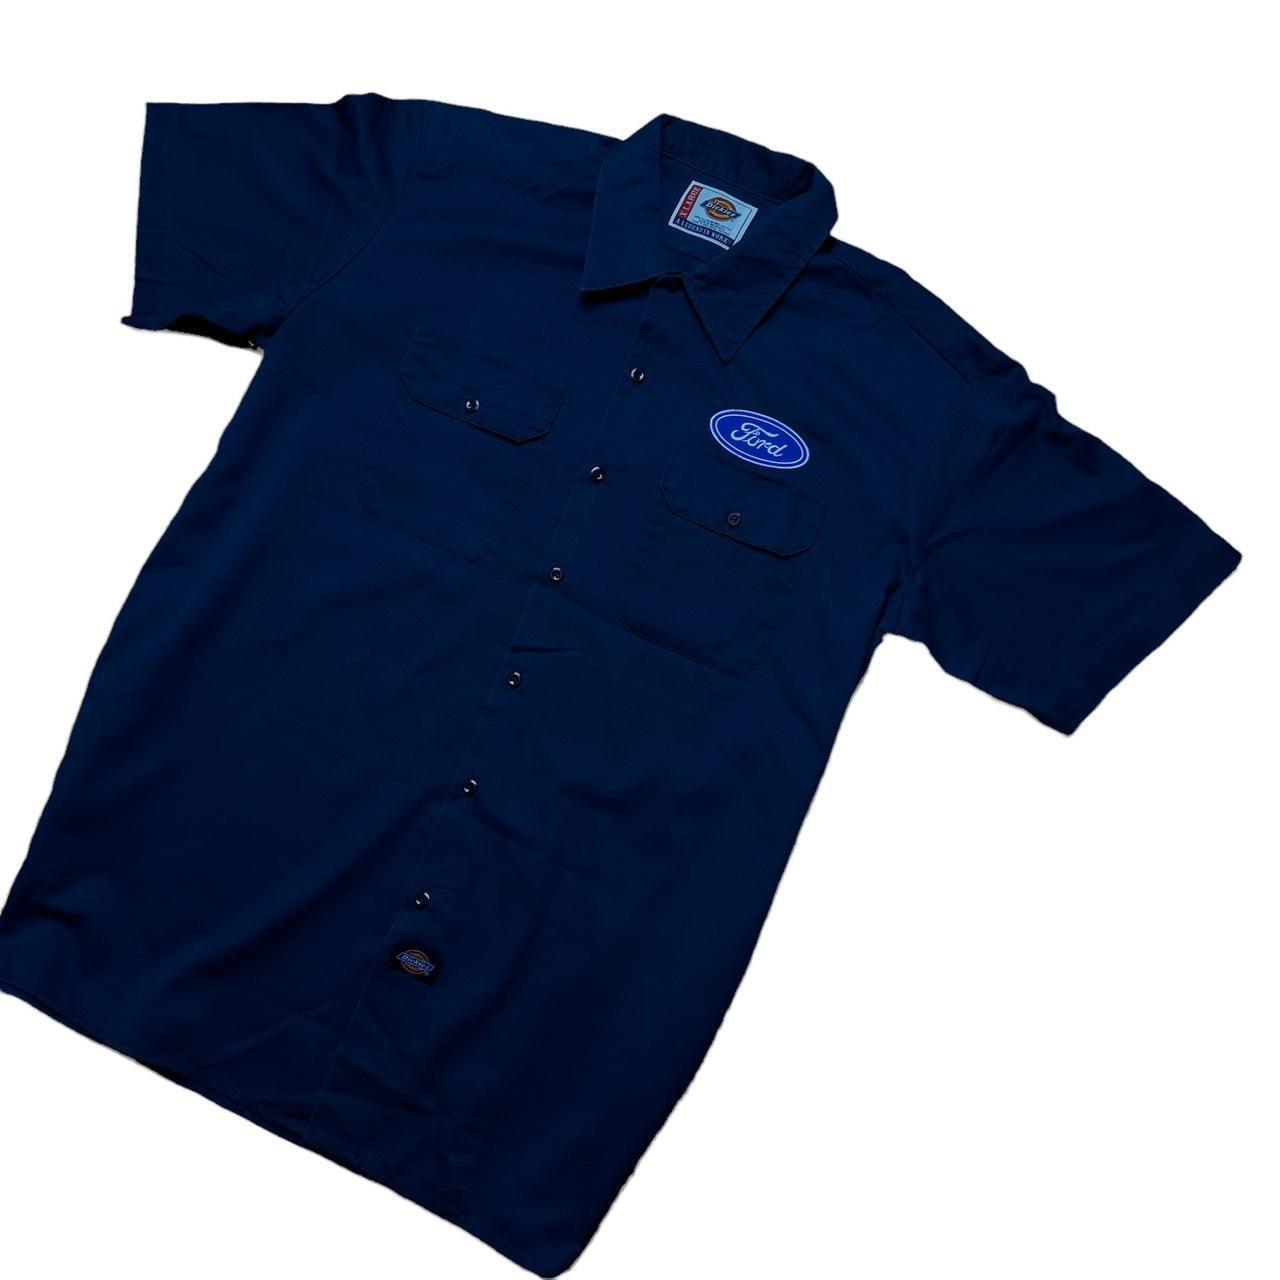 Navy Dickies Ford workwear shirt - Known Source